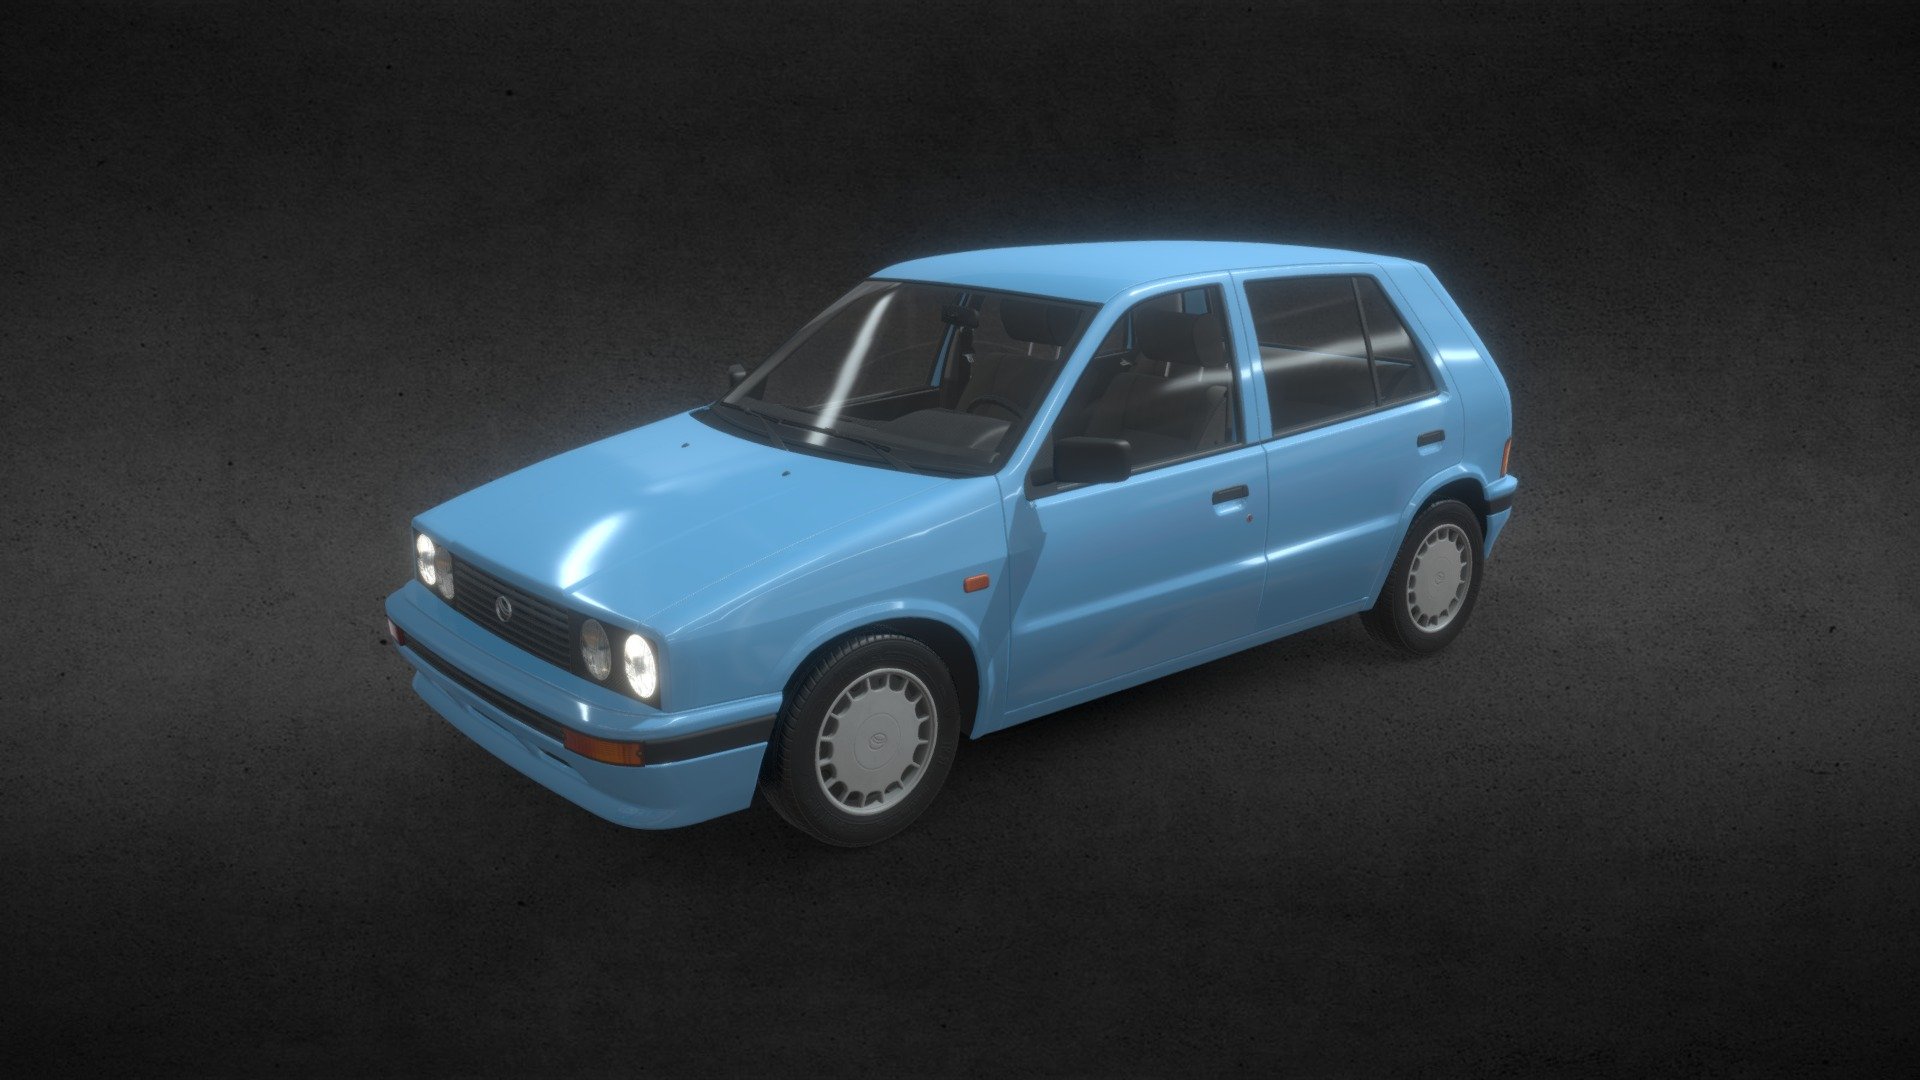 1980s-styled car for Unreal Engine Marketplace and Unity Store - 1980s Hatchback Car - 3D model by lyoshko 3d model